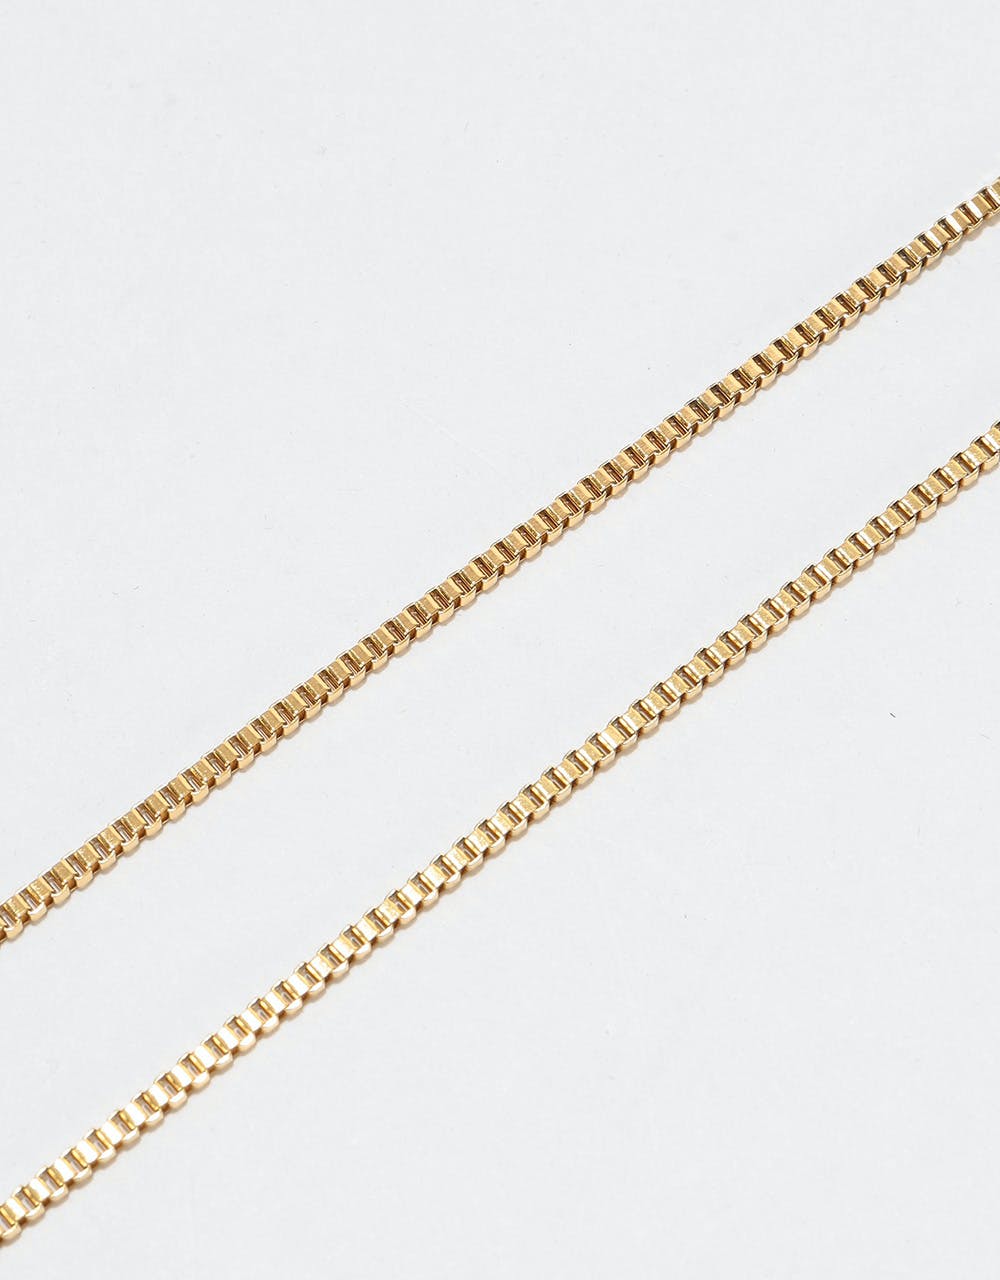 Midvs Co 18K Gold Plated 28" Box Chain Necklace - Gold